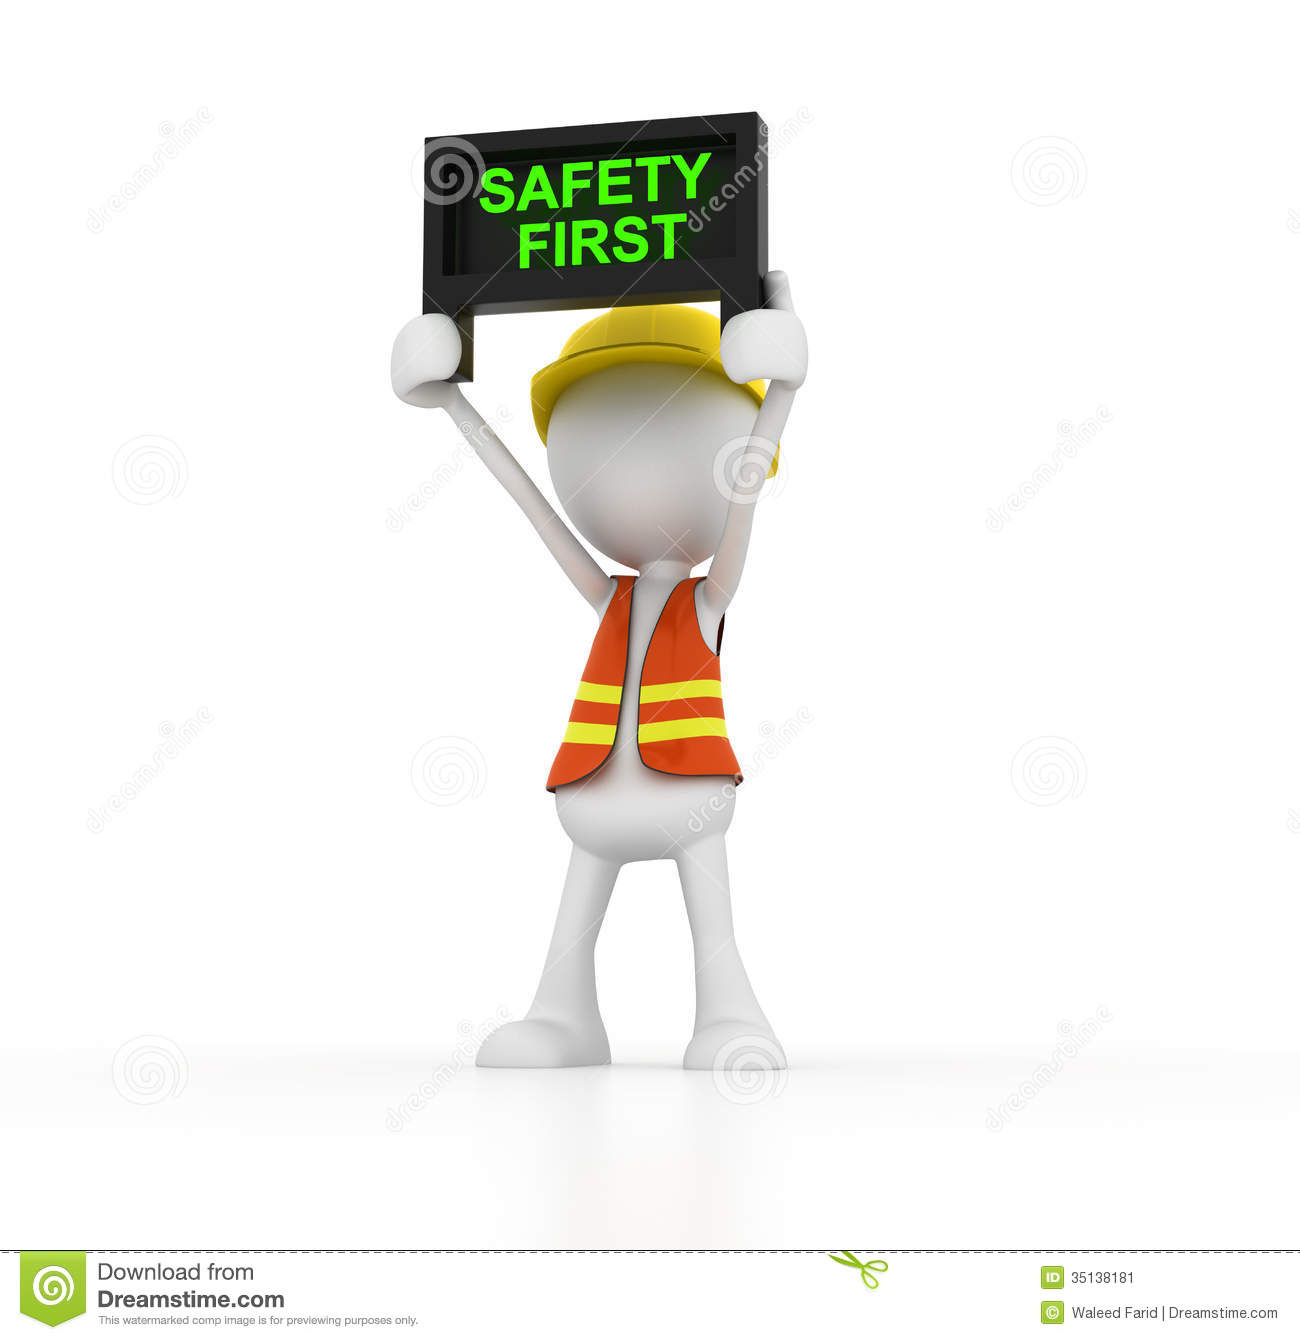 Safety First Stock Image   Image  35138181